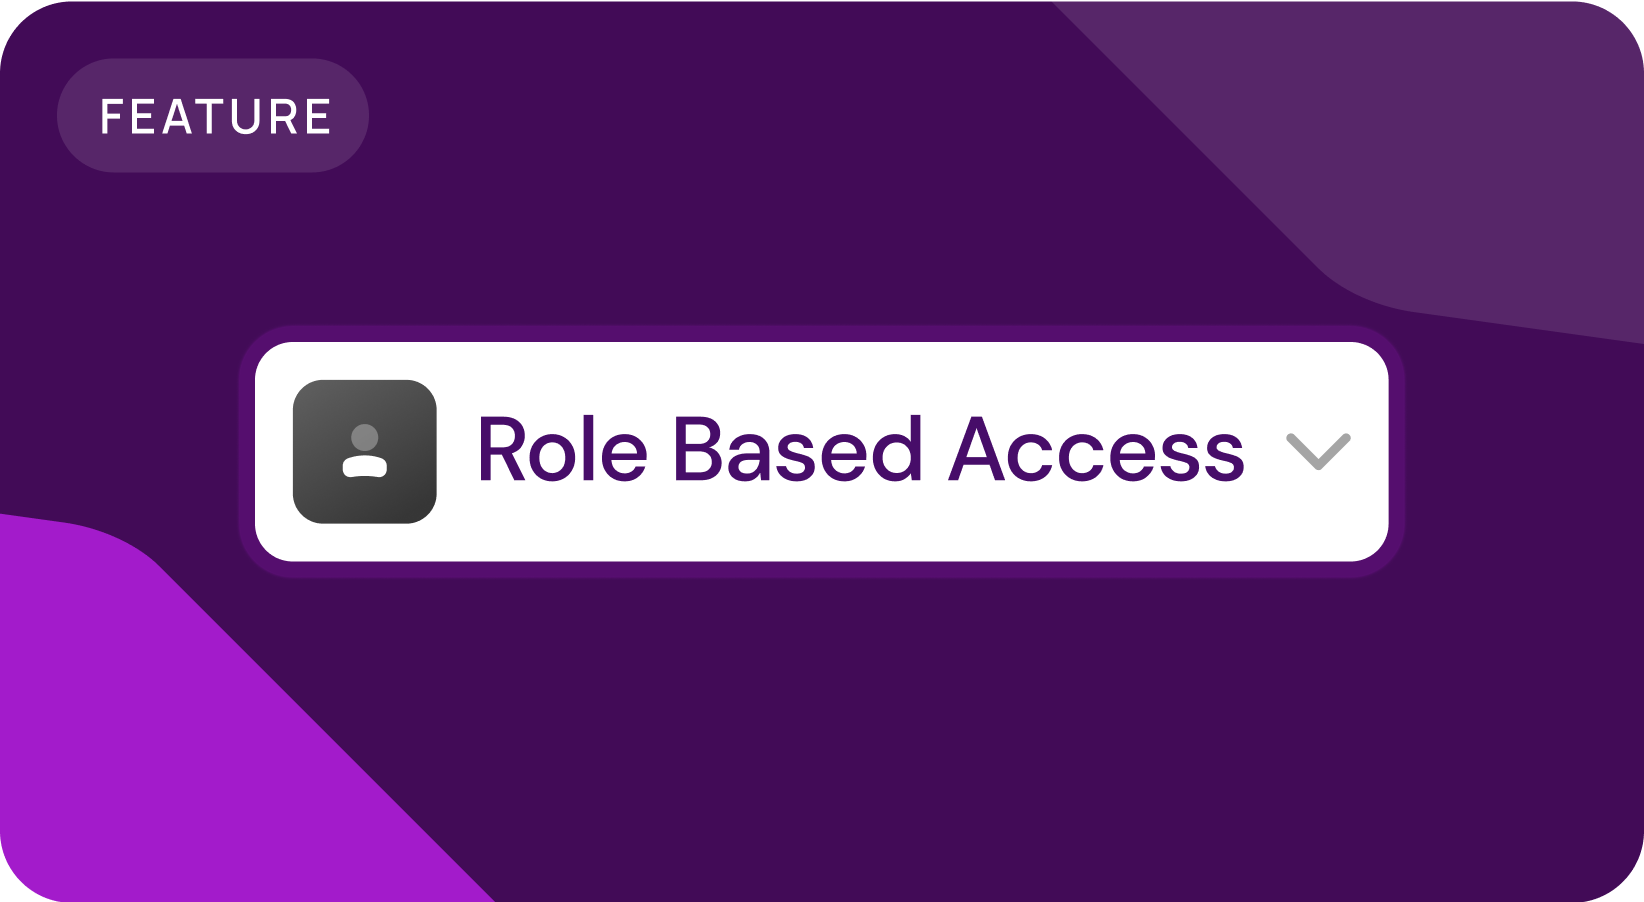 Role-based access